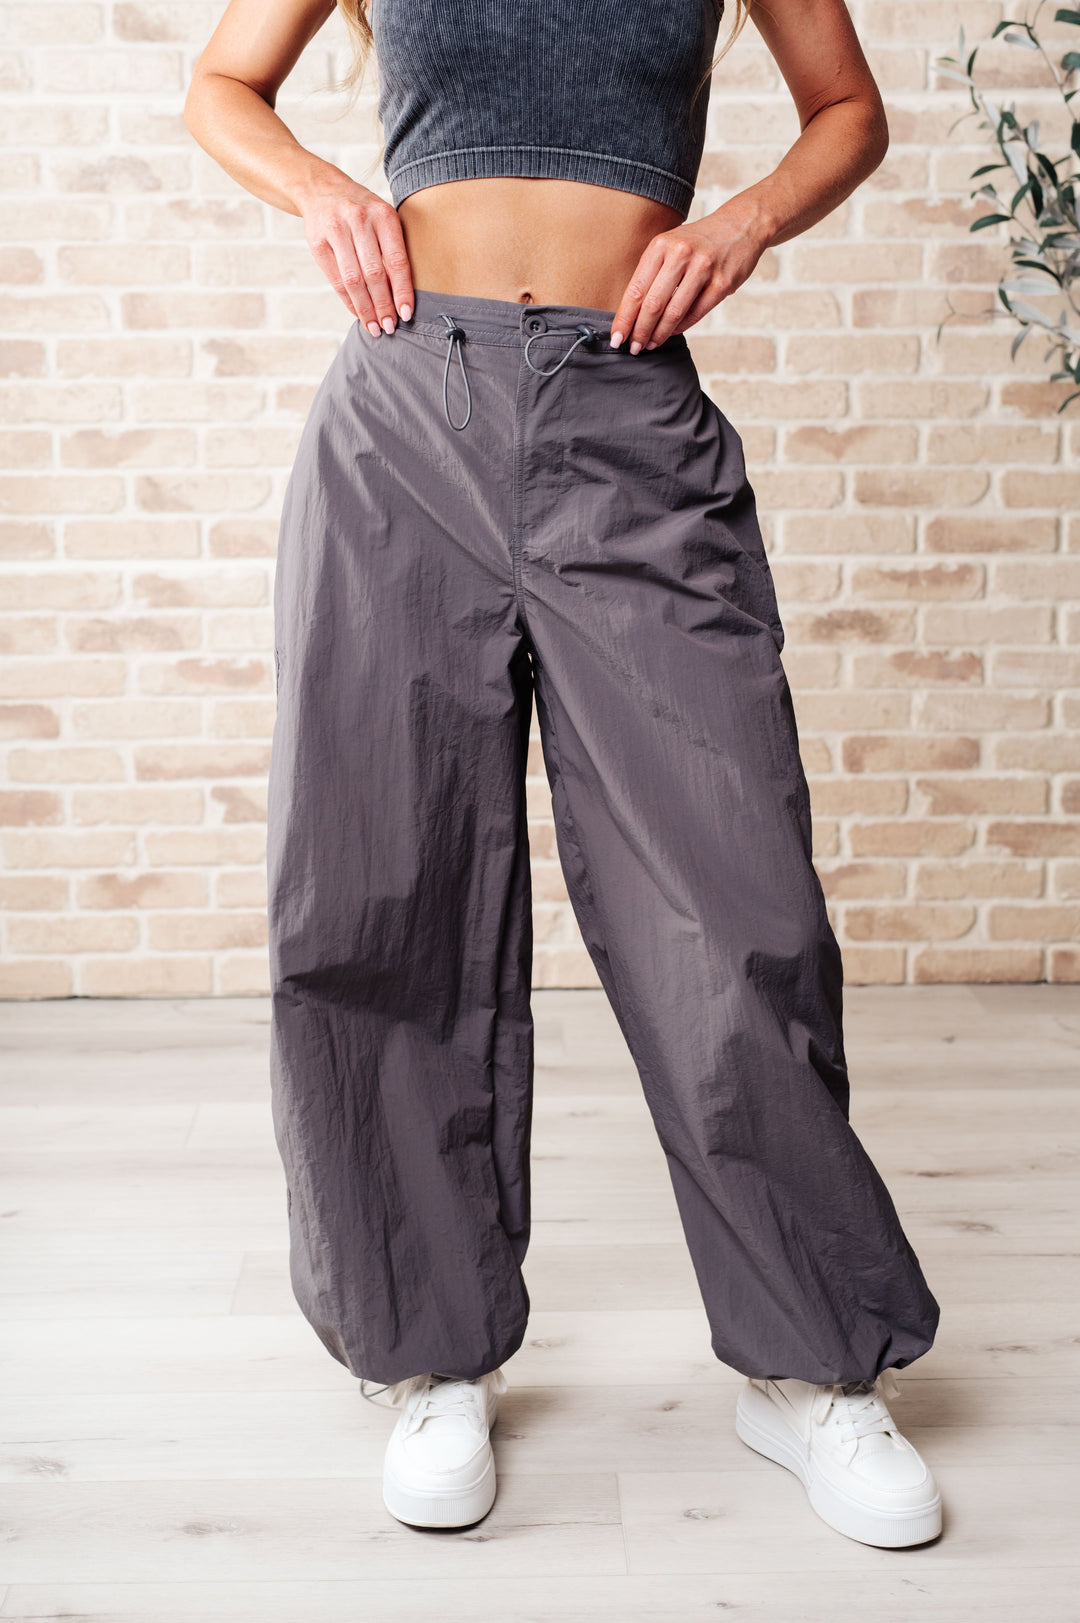 Step Up Joggers in Grey-Pants-Inspired by Justeen-Women's Clothing Boutique